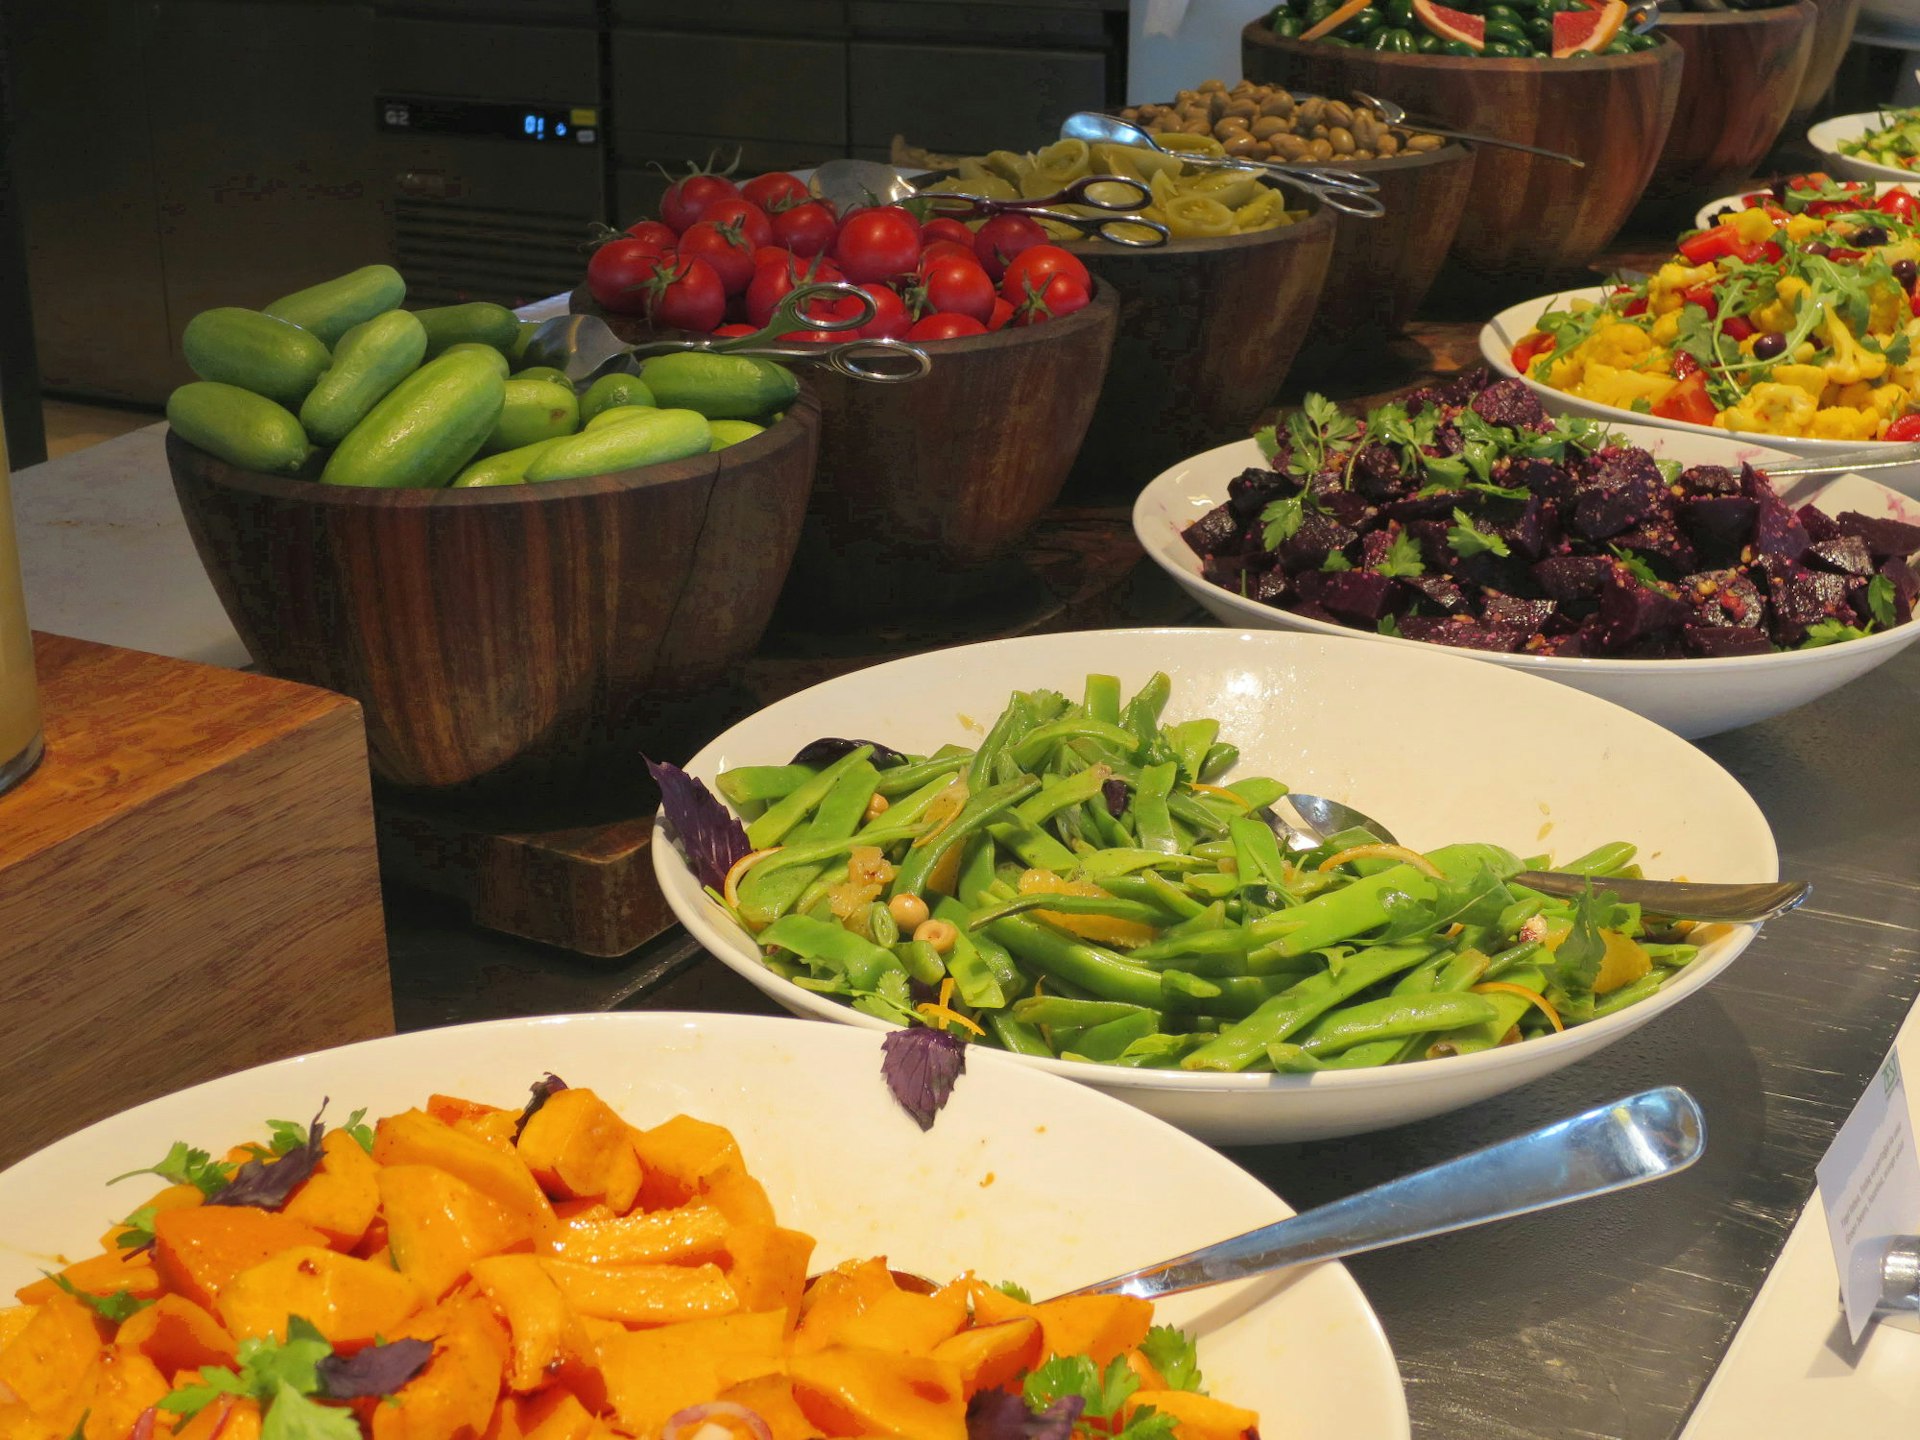 Salad buffet at Zest Lifestyle Cafe, Baku. Image by Sarah Reid / Lonely Planet